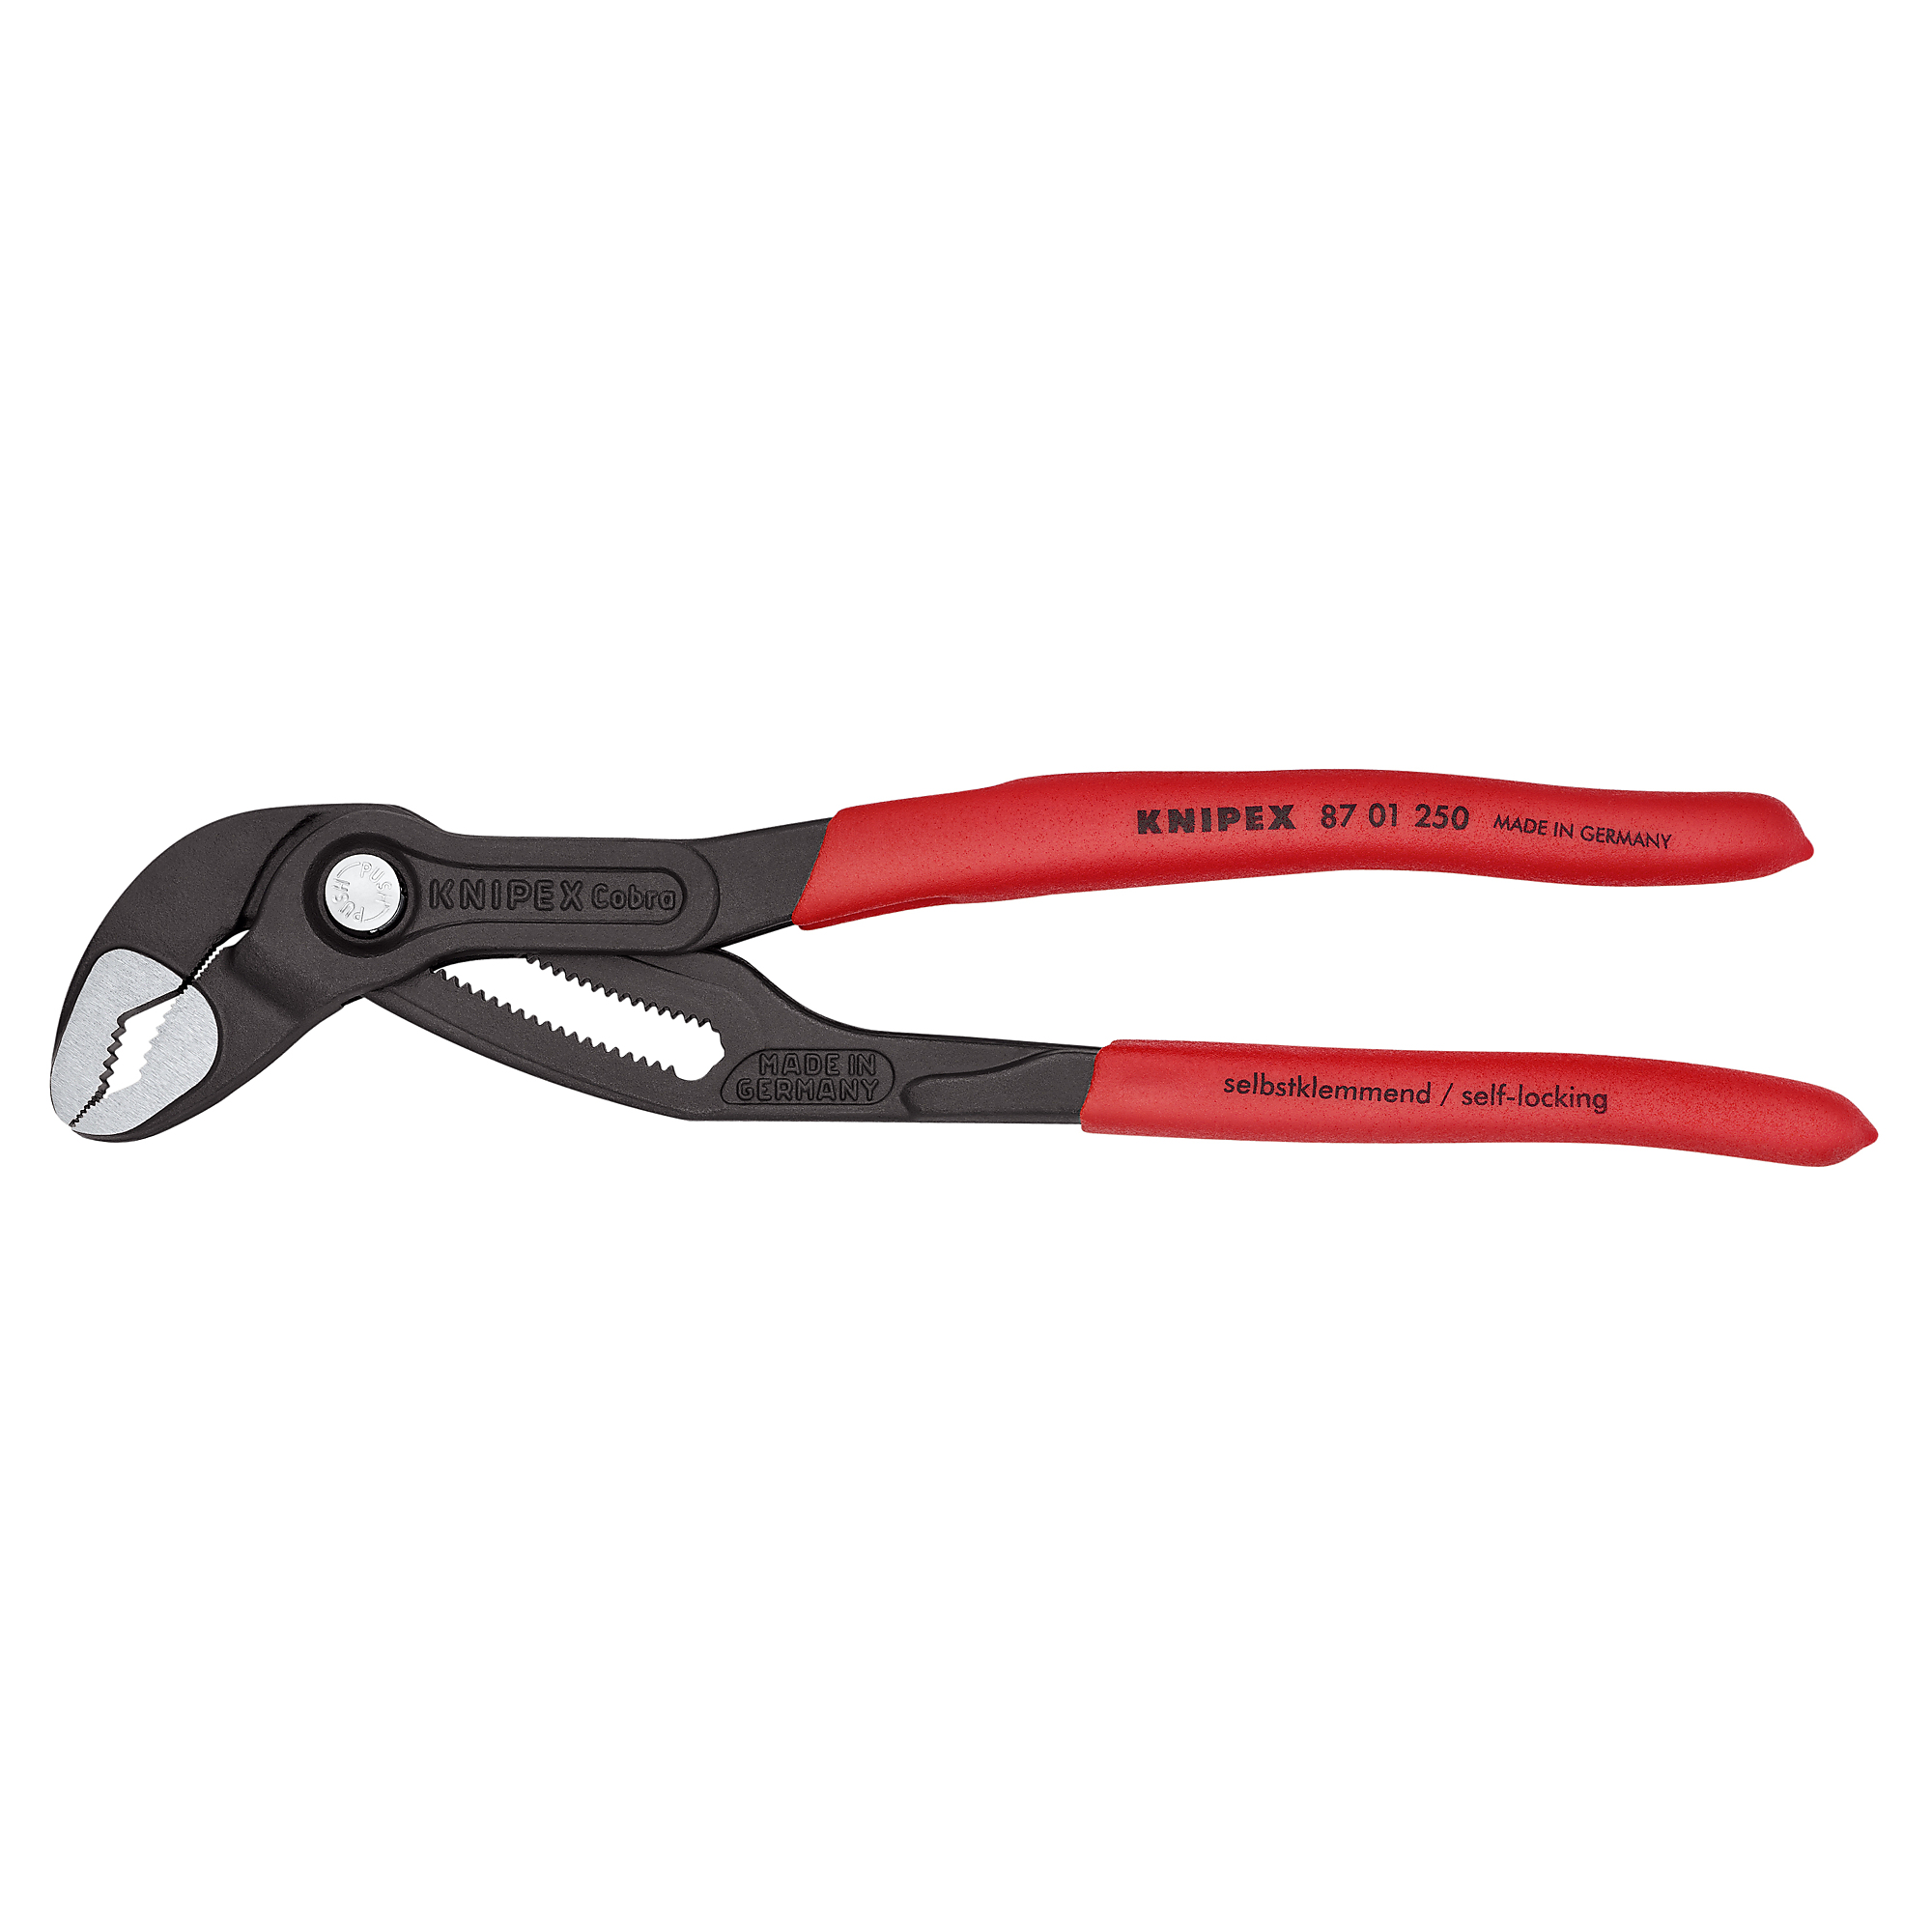 KNIPEX Cobra , Cobra Water Pump Pliers, Non-slip plastic, 10Inch, Pieces (qty.) 1 Material Steel, Jaw Capacity 2 in, Model 87 01 250 SBA